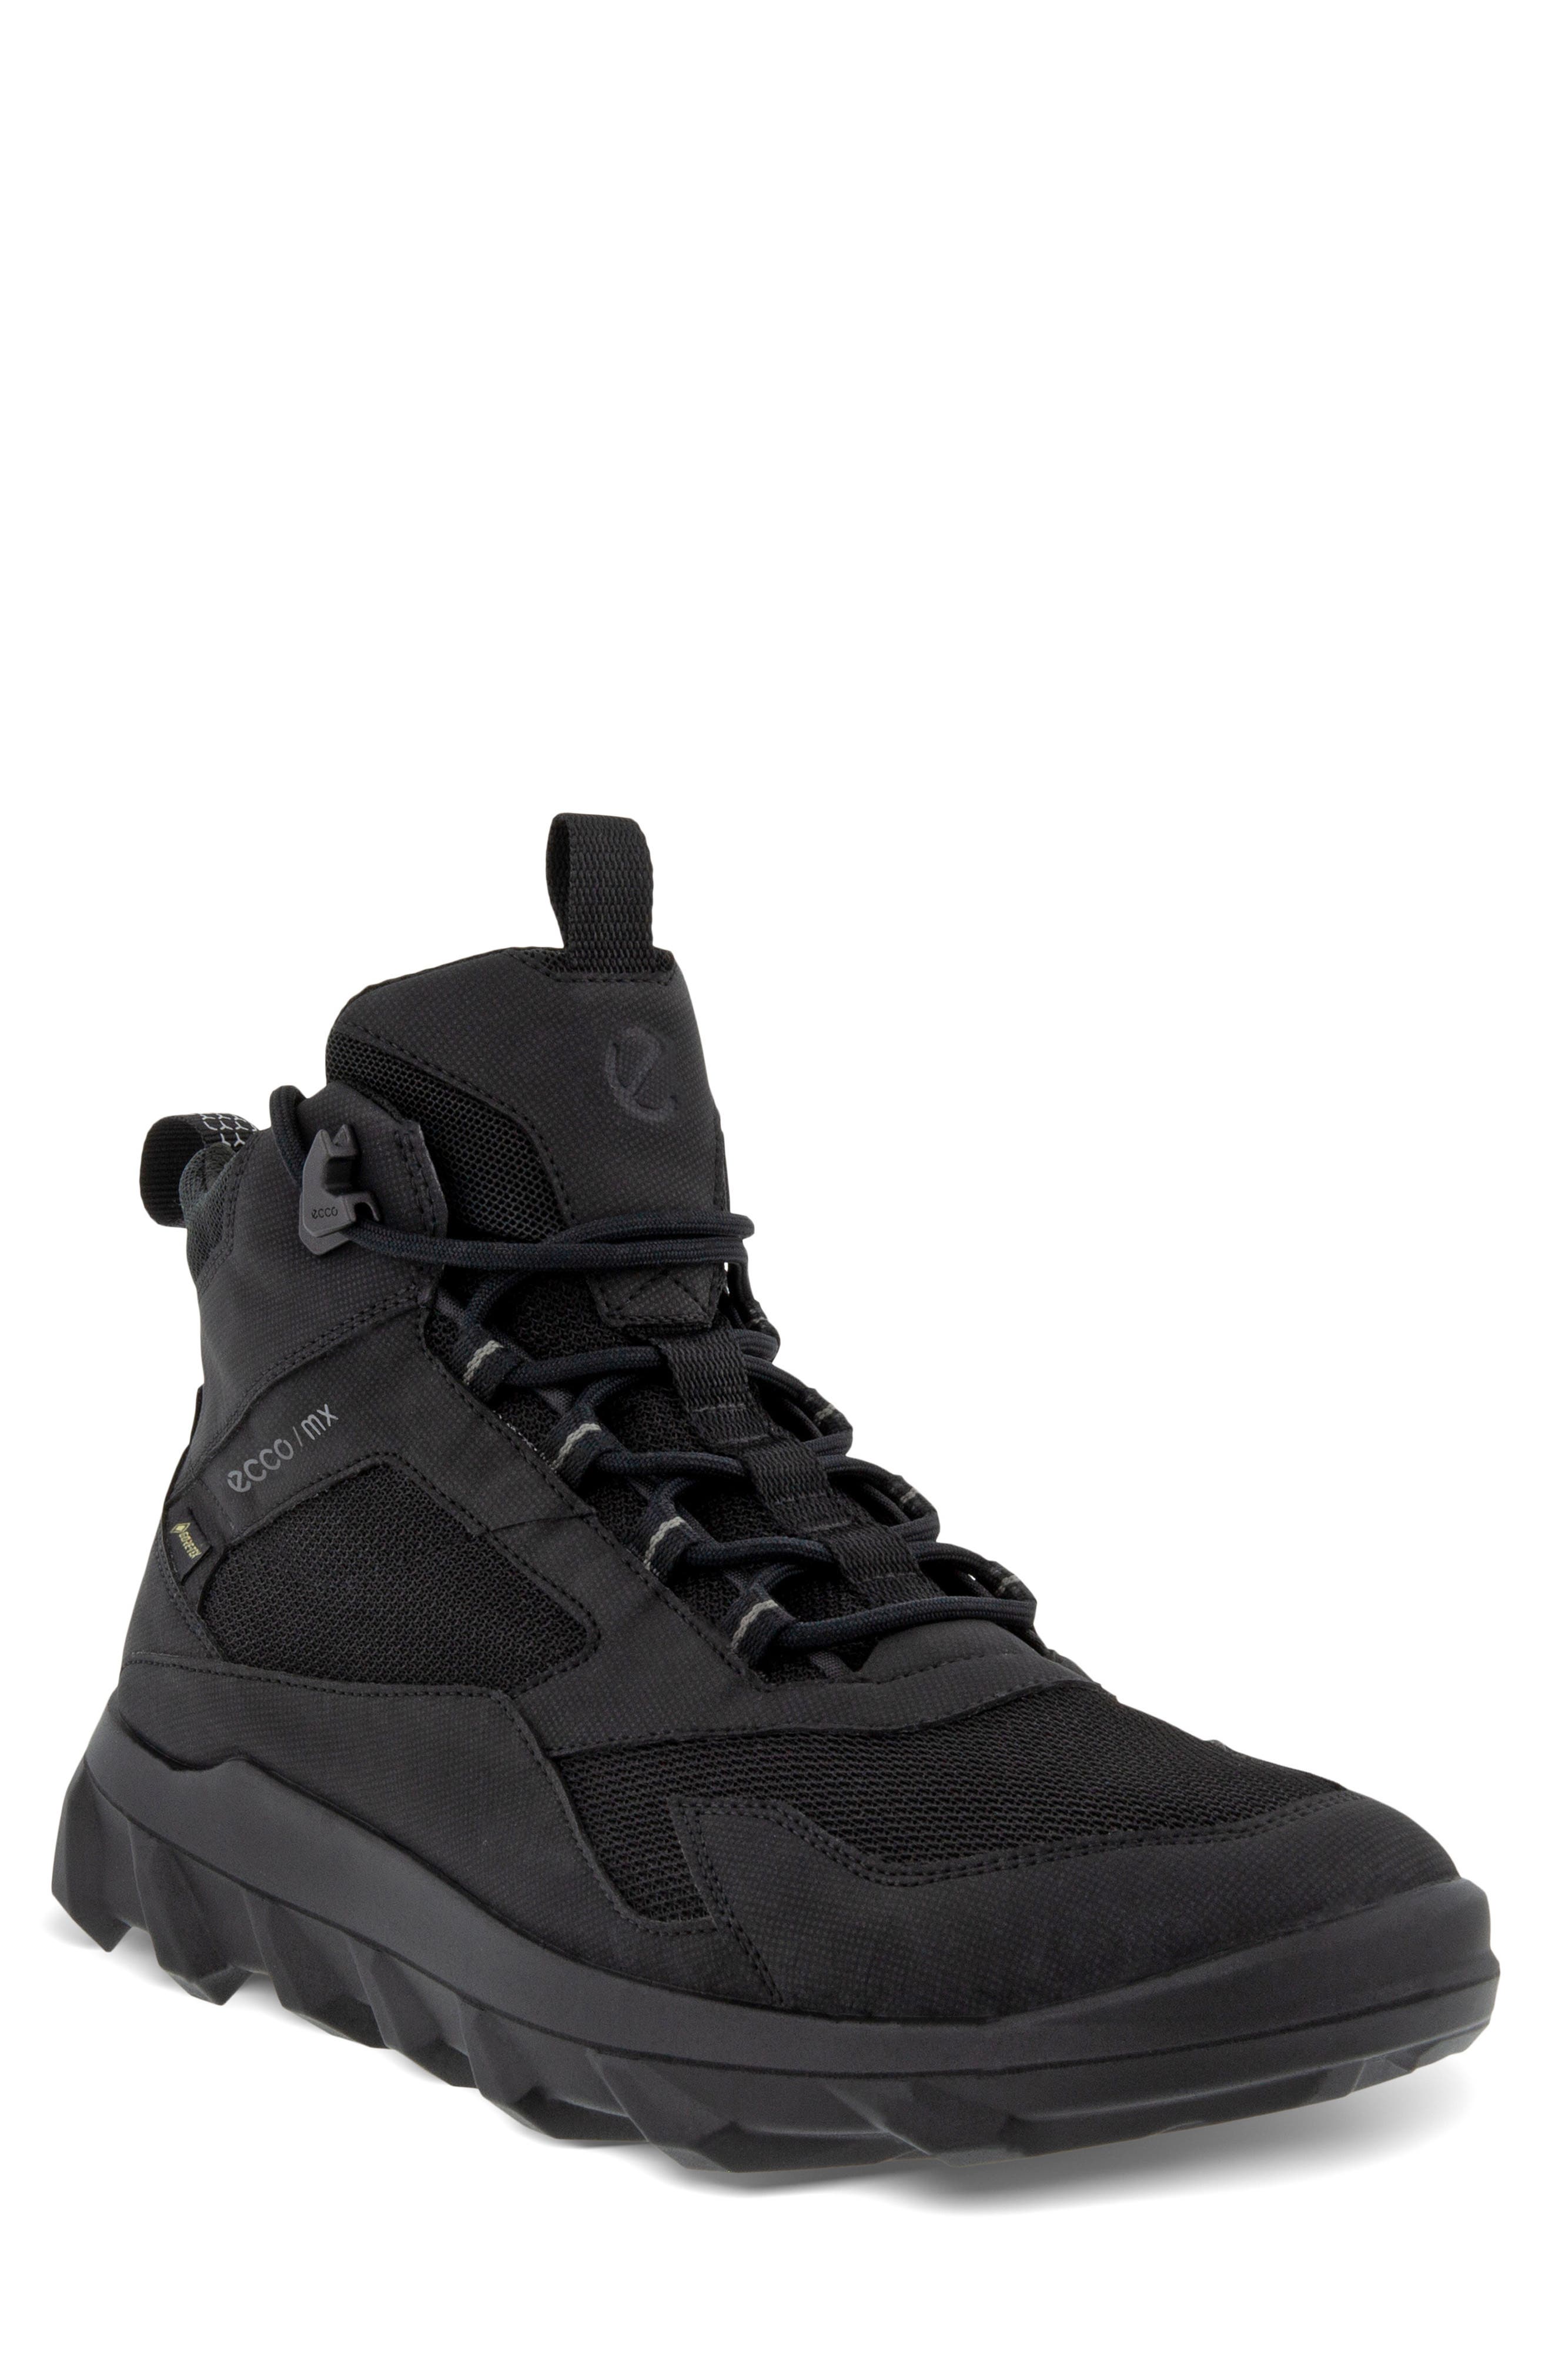 UPC 194890197510 product image for ECCO MX Gore-Tex(R) Waterproof Hiking Boot in Black/Black at Nordstrom, Size 13- | upcitemdb.com